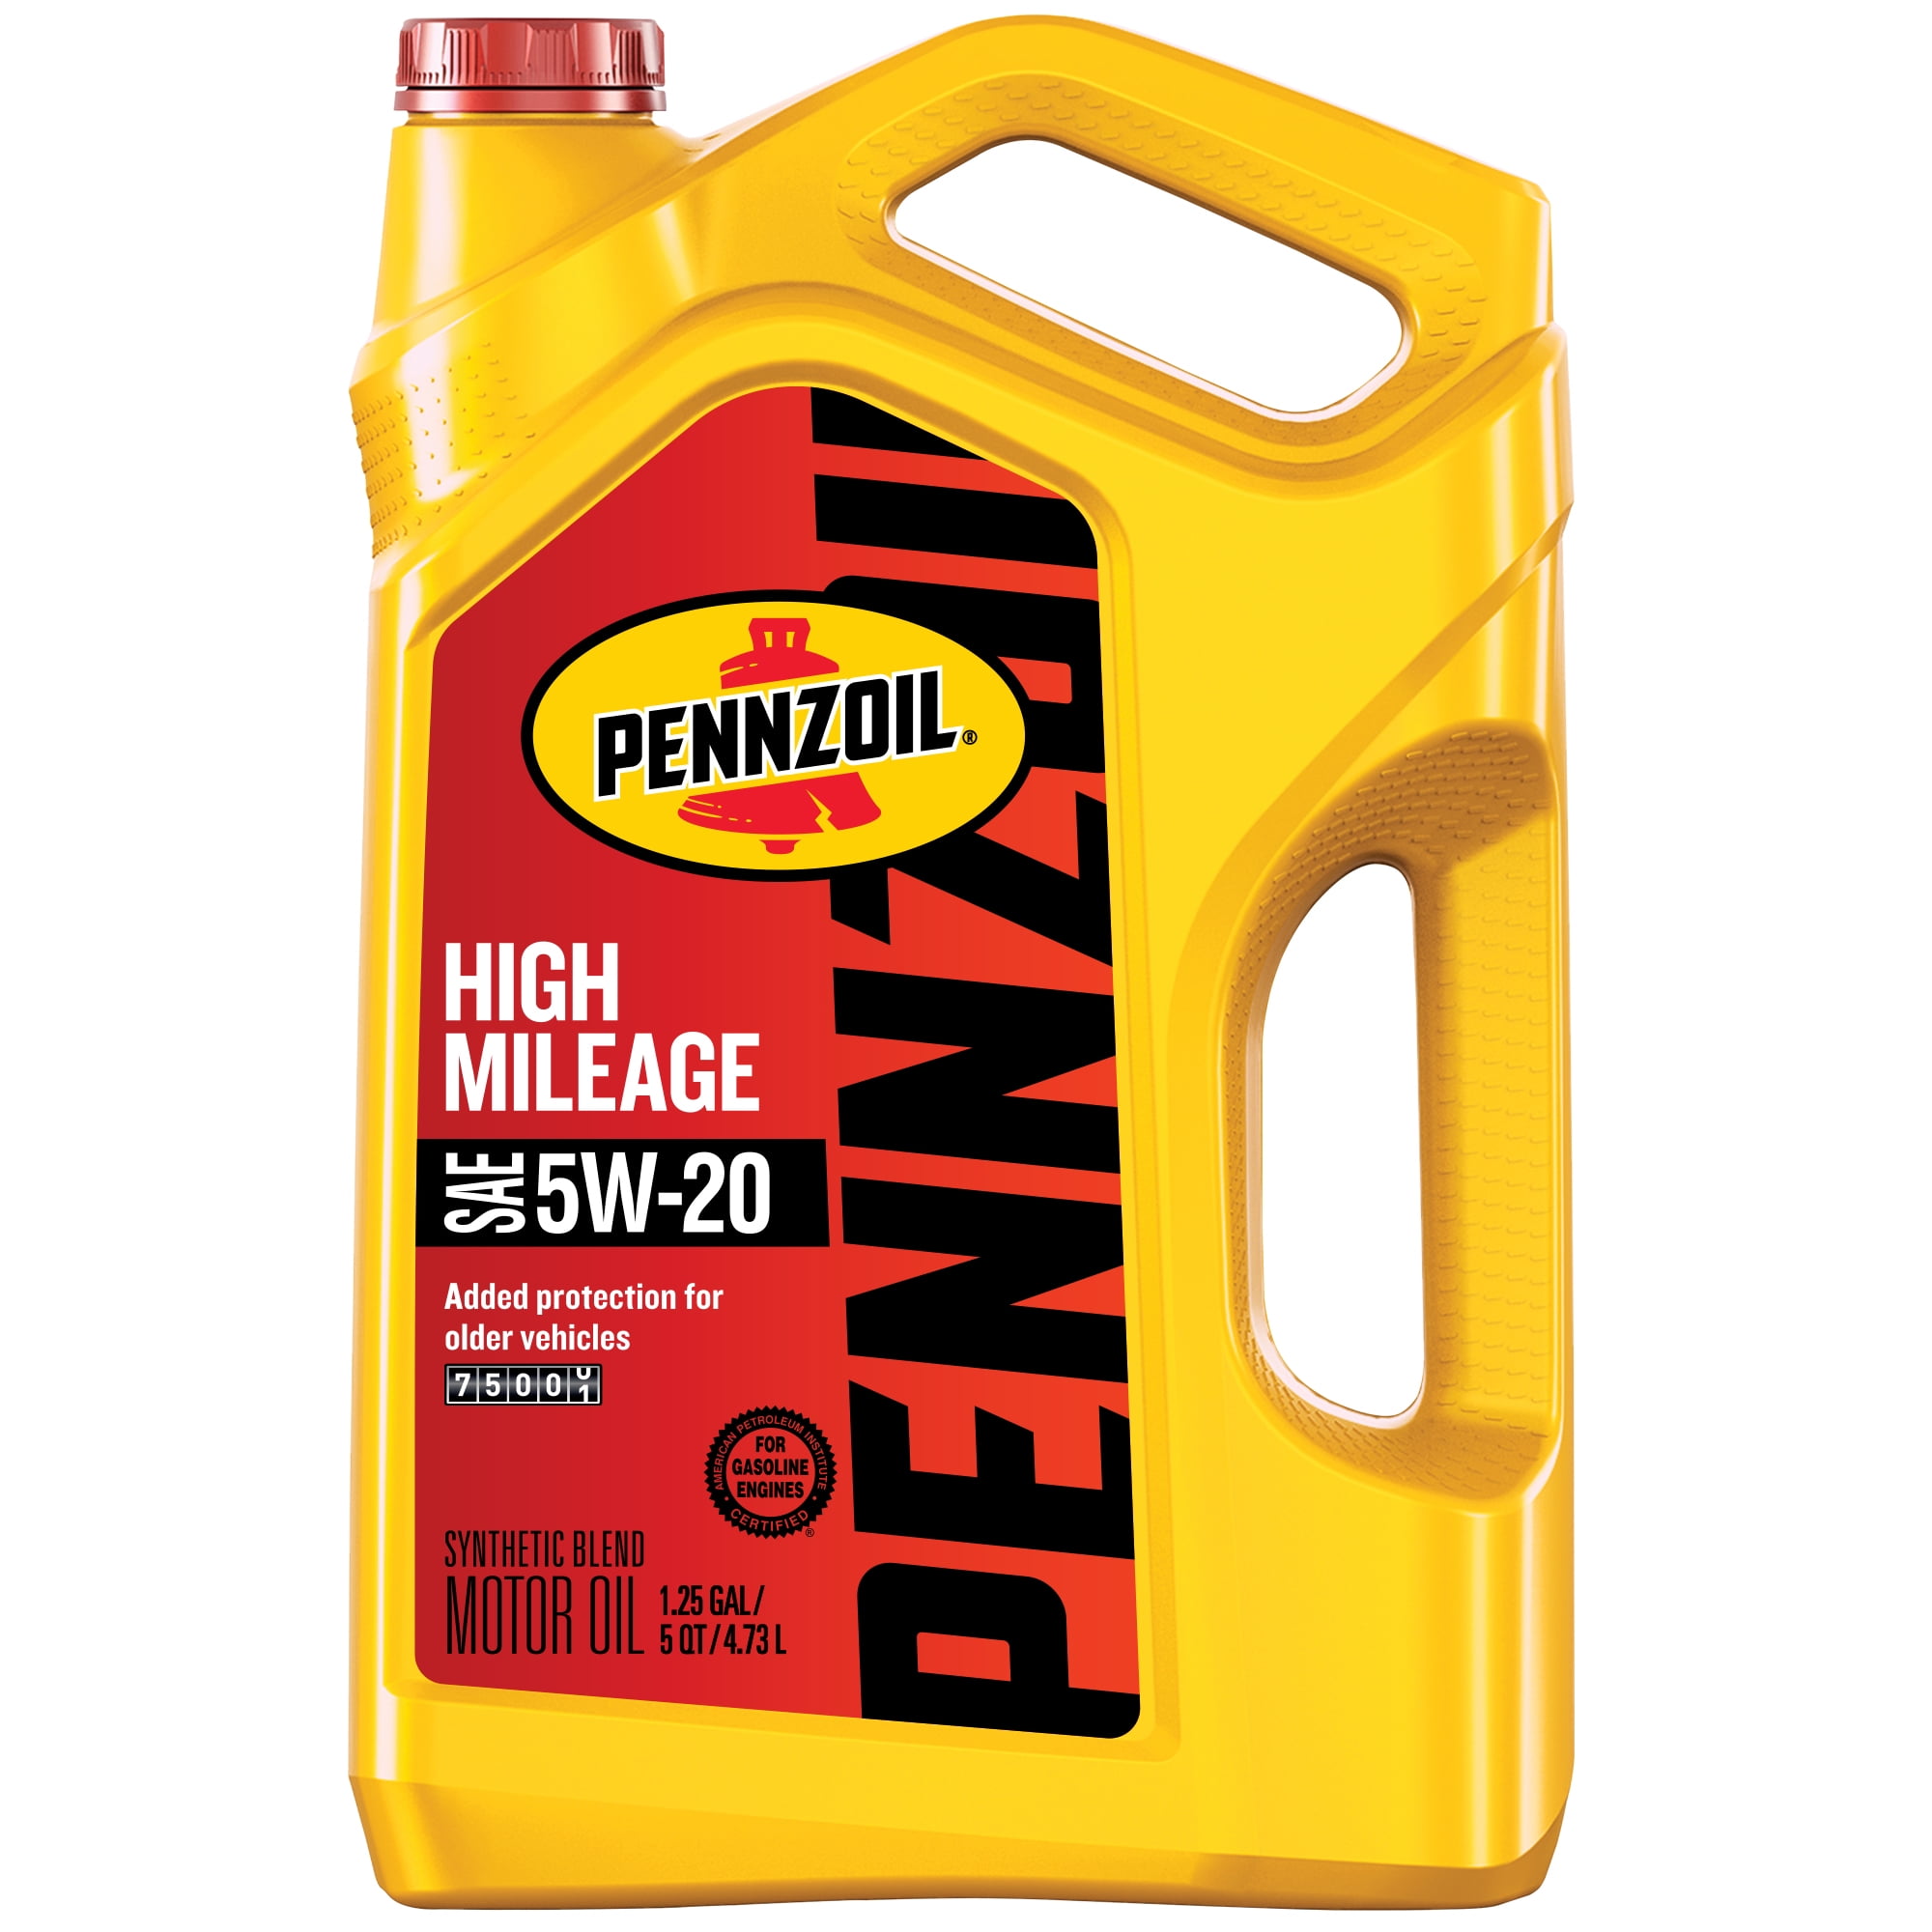 How Many Miles Does Pennzoil Synthetic Oil Last